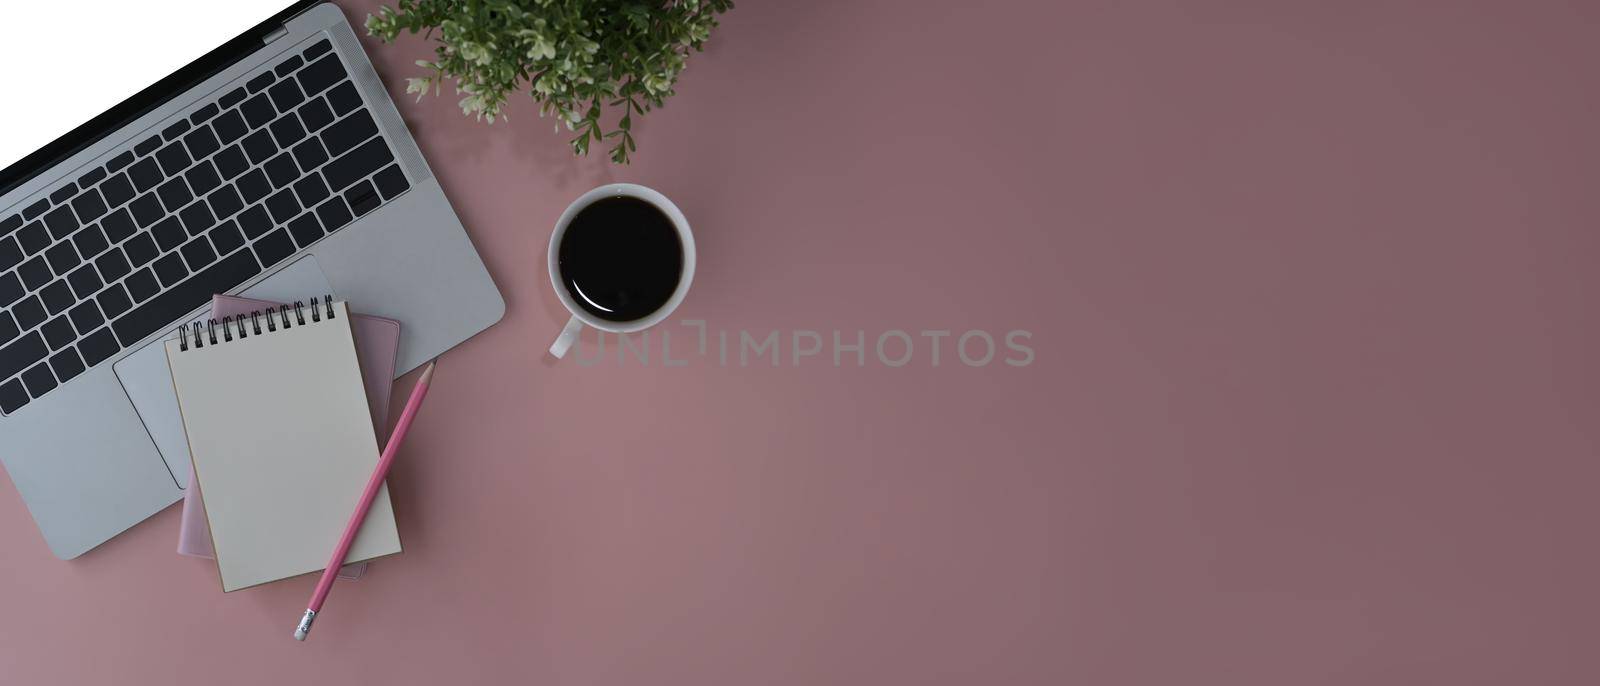 Flat lay laptop computer, coffee cup, notebook and potted plant on pink background. Copy space.